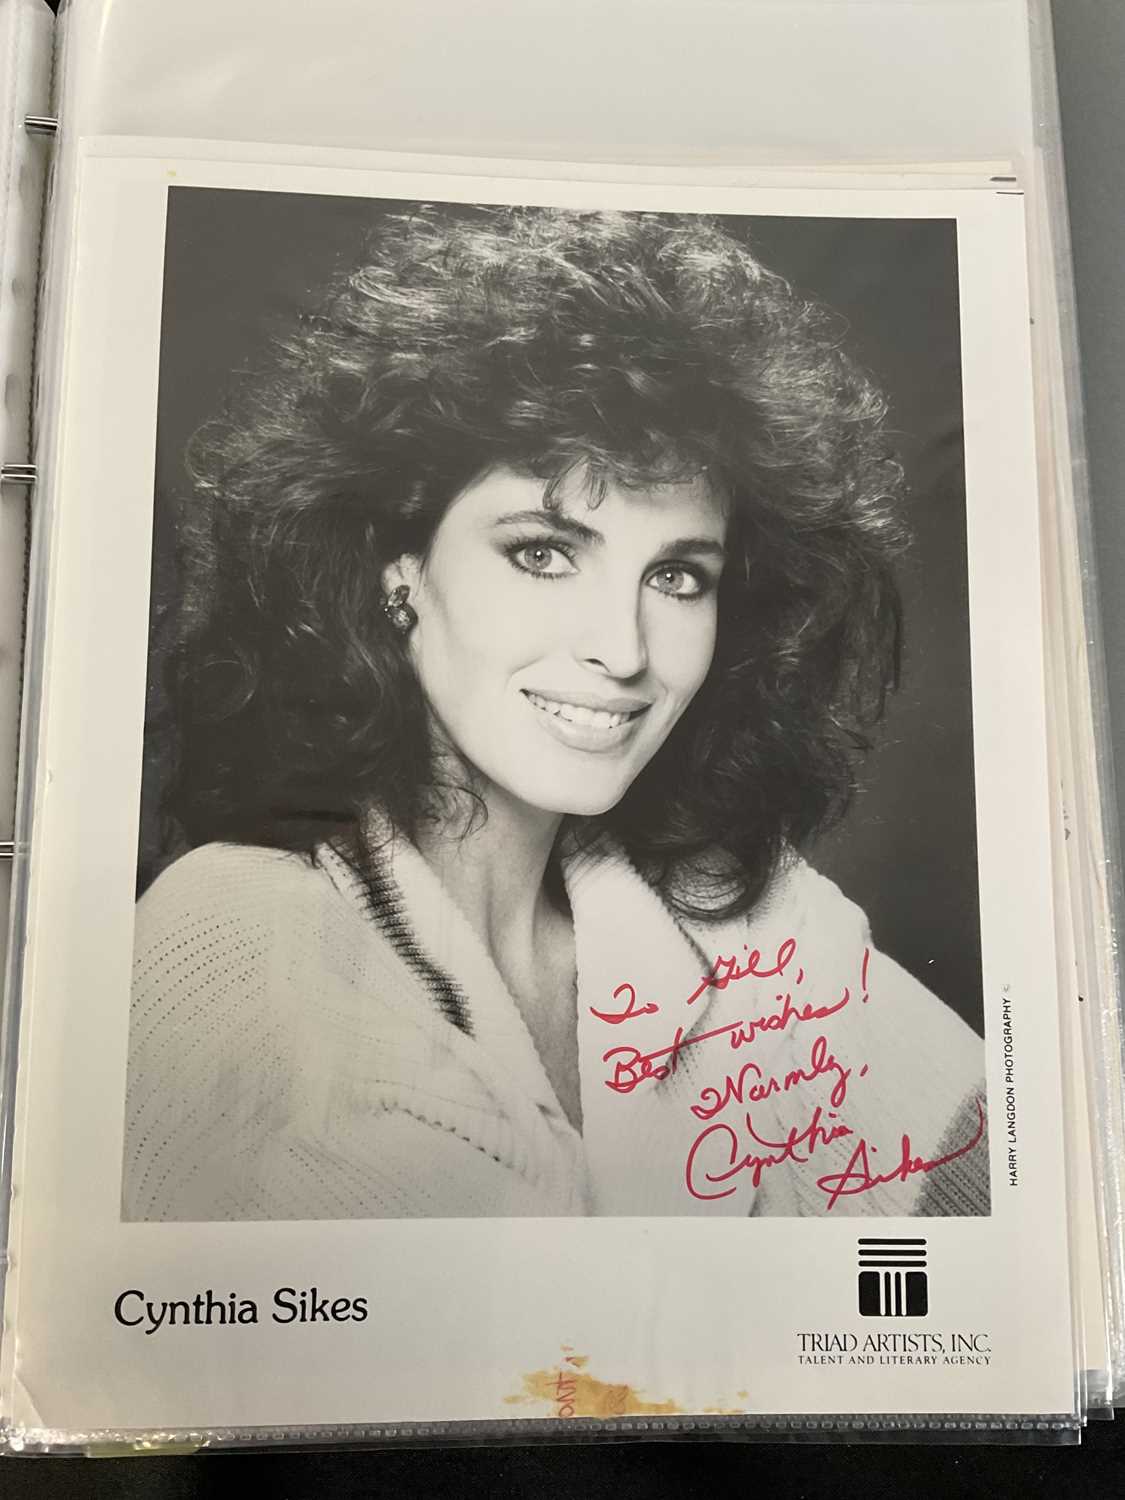 A folder containing 80+ celebrity autographs including sports stars, musicians, actors and TV - Image 7 of 7